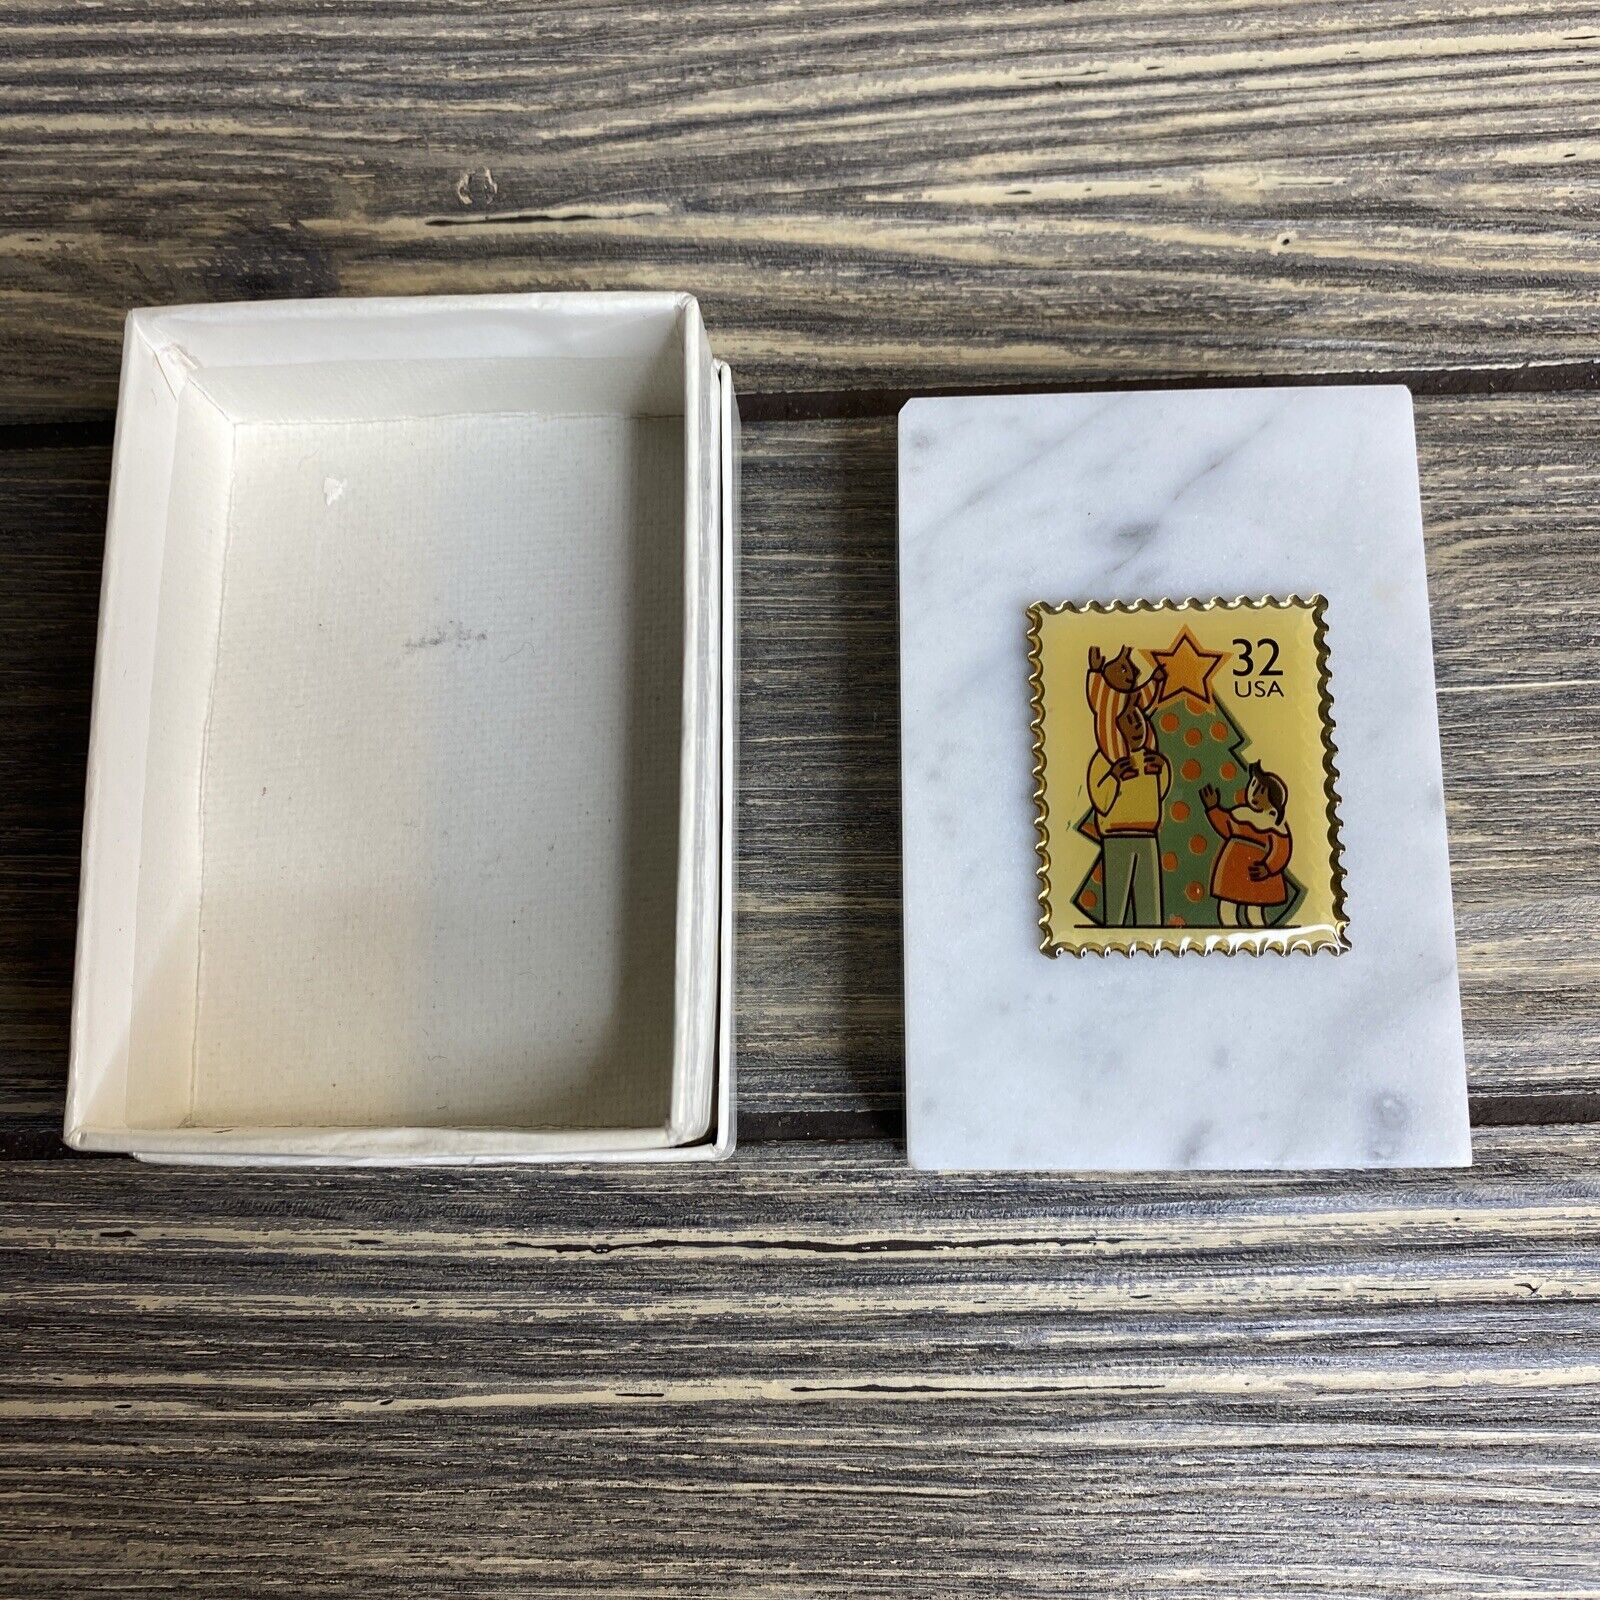 Vintage March Co Stamp Design Marble Paperweight 32 Cent Stamp Christmas Tree